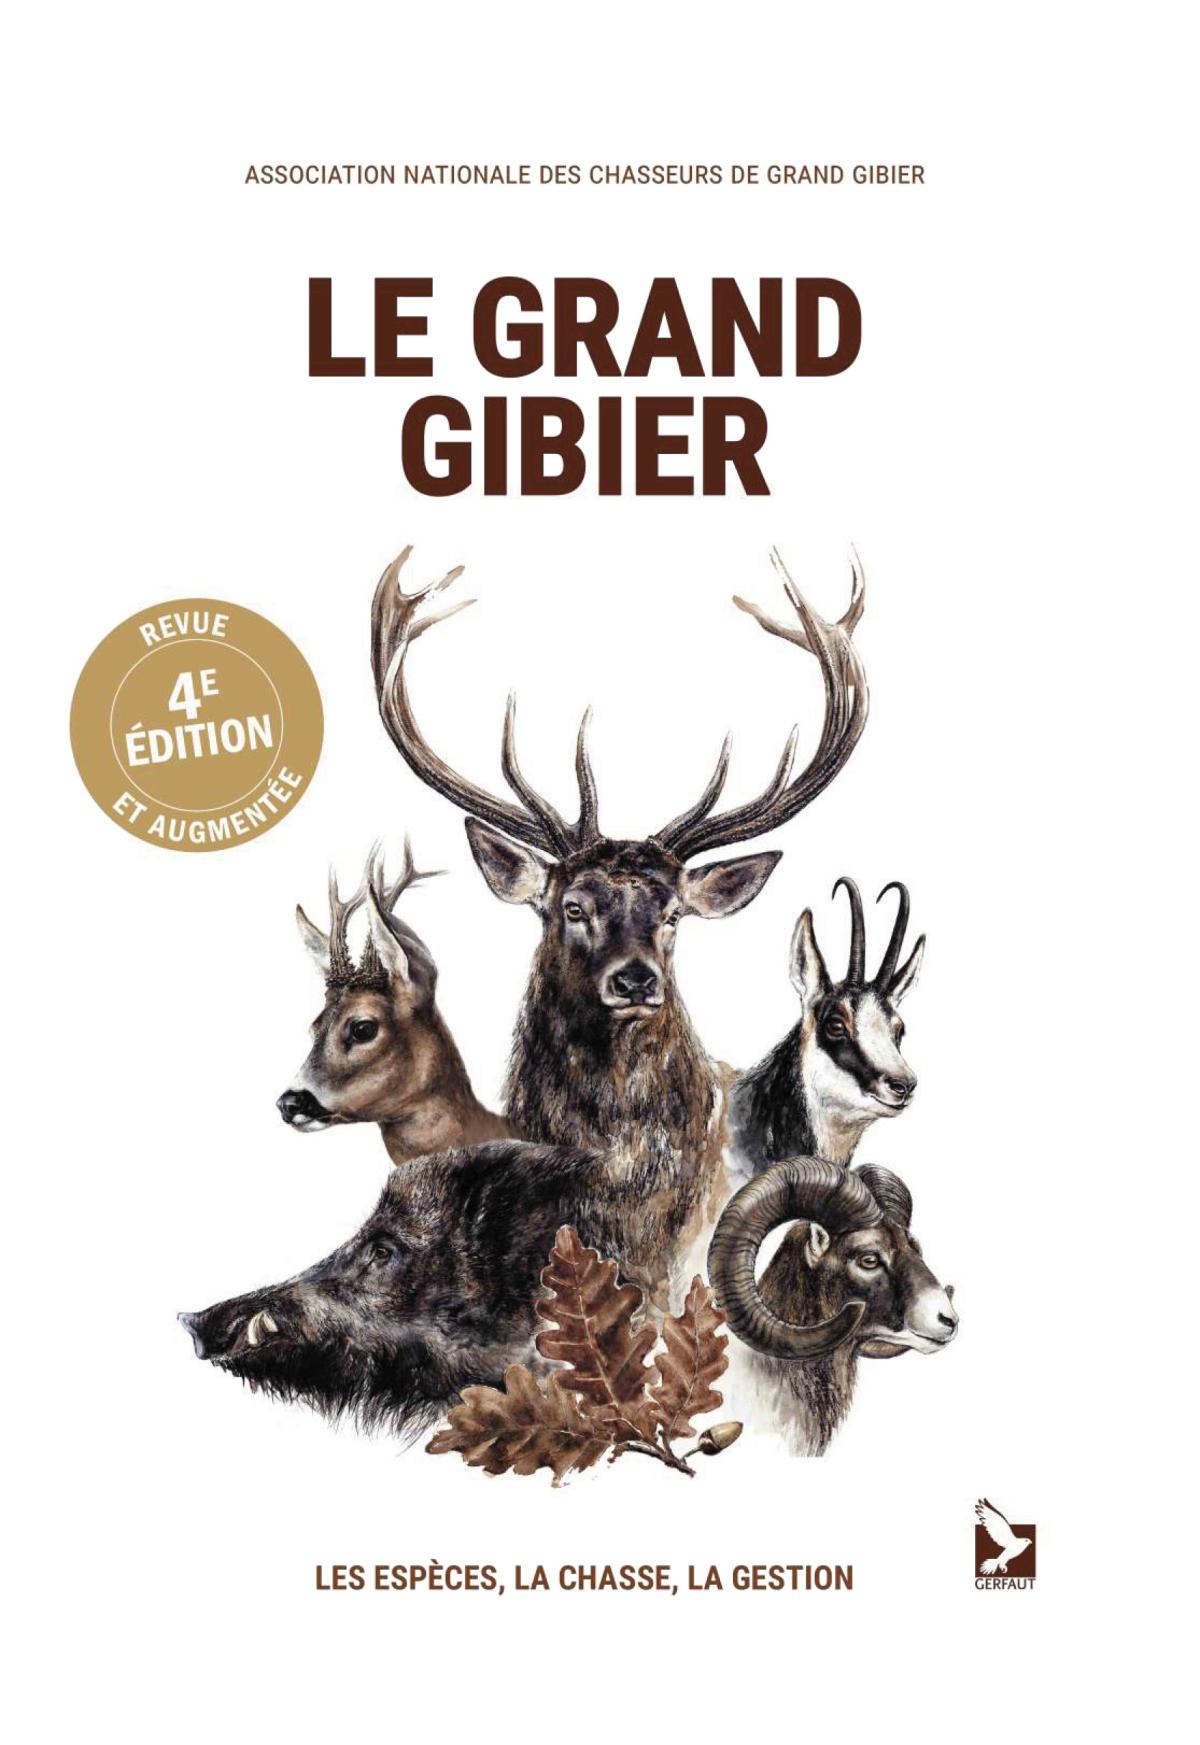 Le grand gibier, Ouvrage collectif